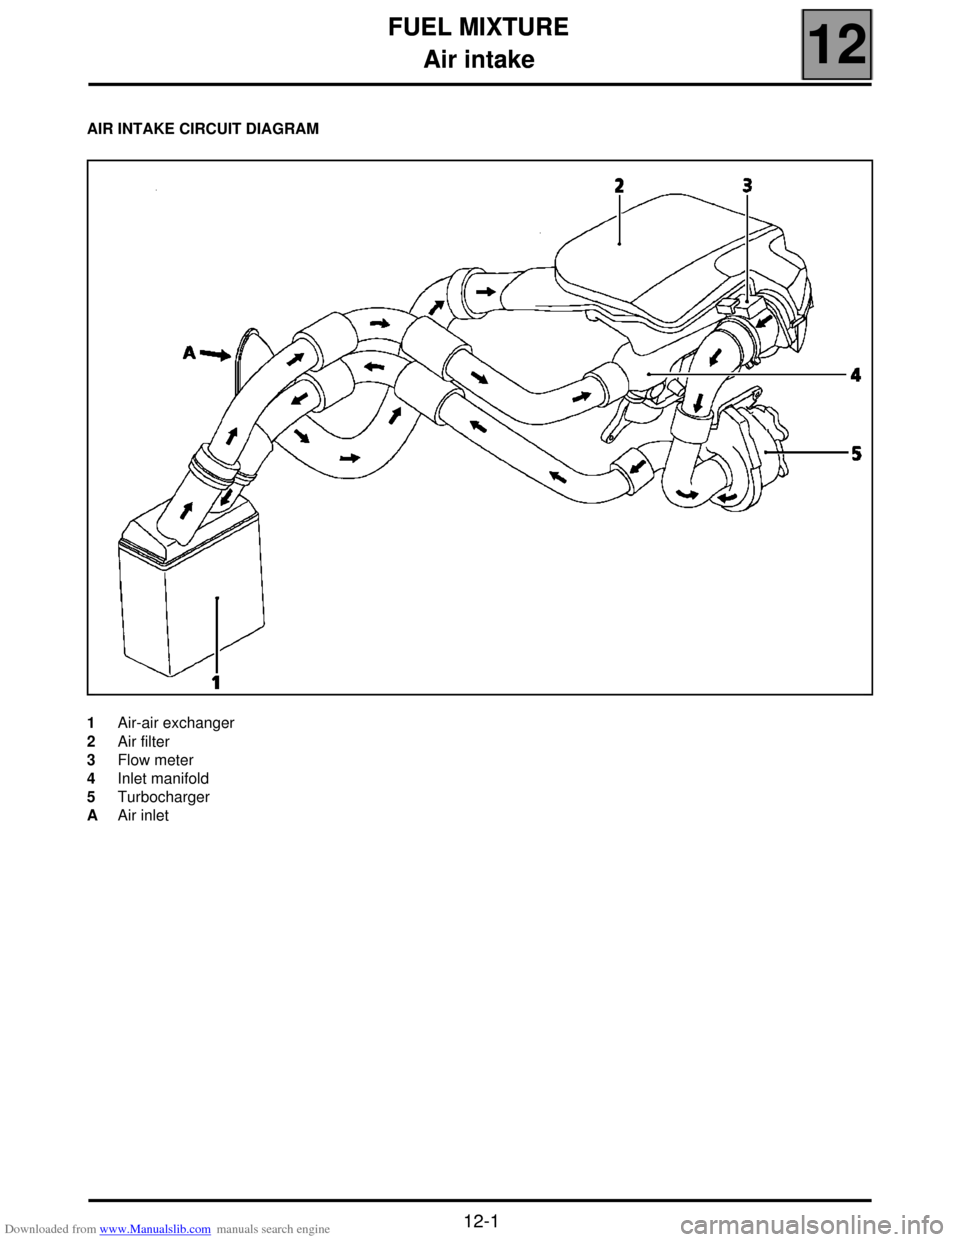 RENAULT SCENIC 2000 J64 / 1.G Technical Note 3426A Workshop Manual Downloaded from www.Manualslib.com manuals search engine FUEL MIXTURE
Air intake
12
112
FUEL MIXTURE
Air intake
AIR INTAKE CIRCUIT DIAGRAM
1 Air-air exchanger
2 Air filter
3 Flow meter
4 Inlet manifol